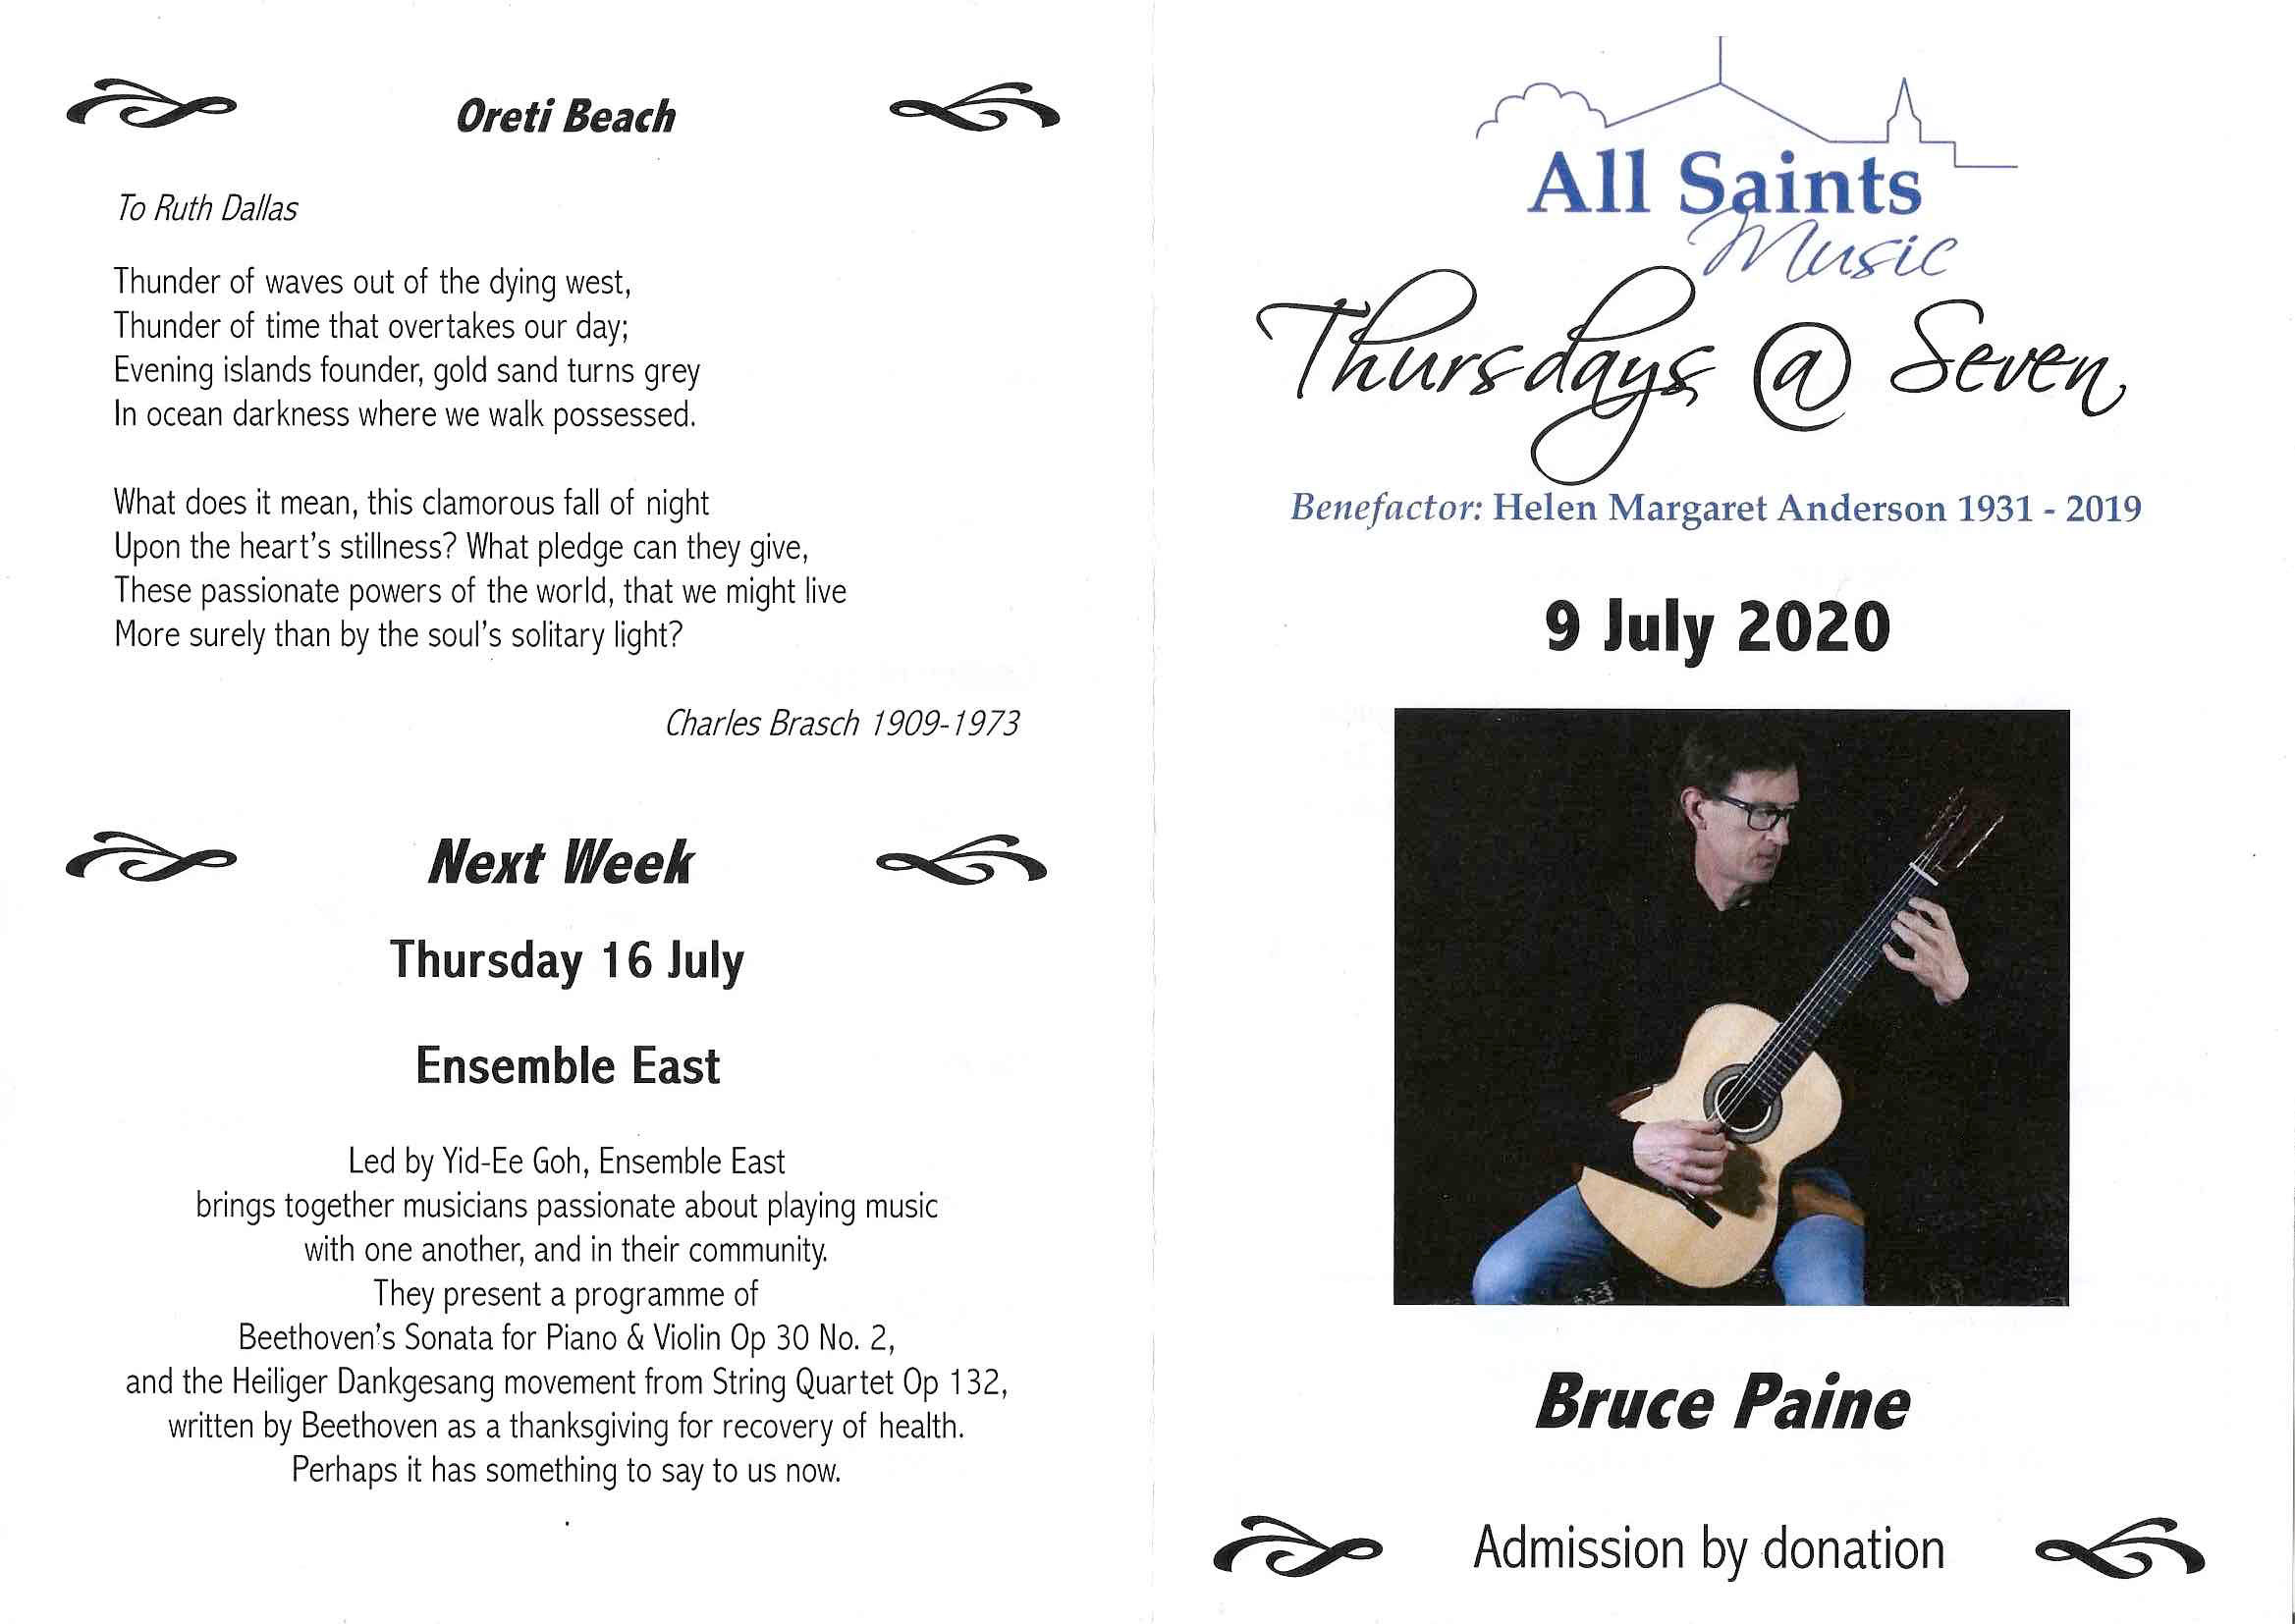 Bruce Paine, Howick Concert, July 9th 2020